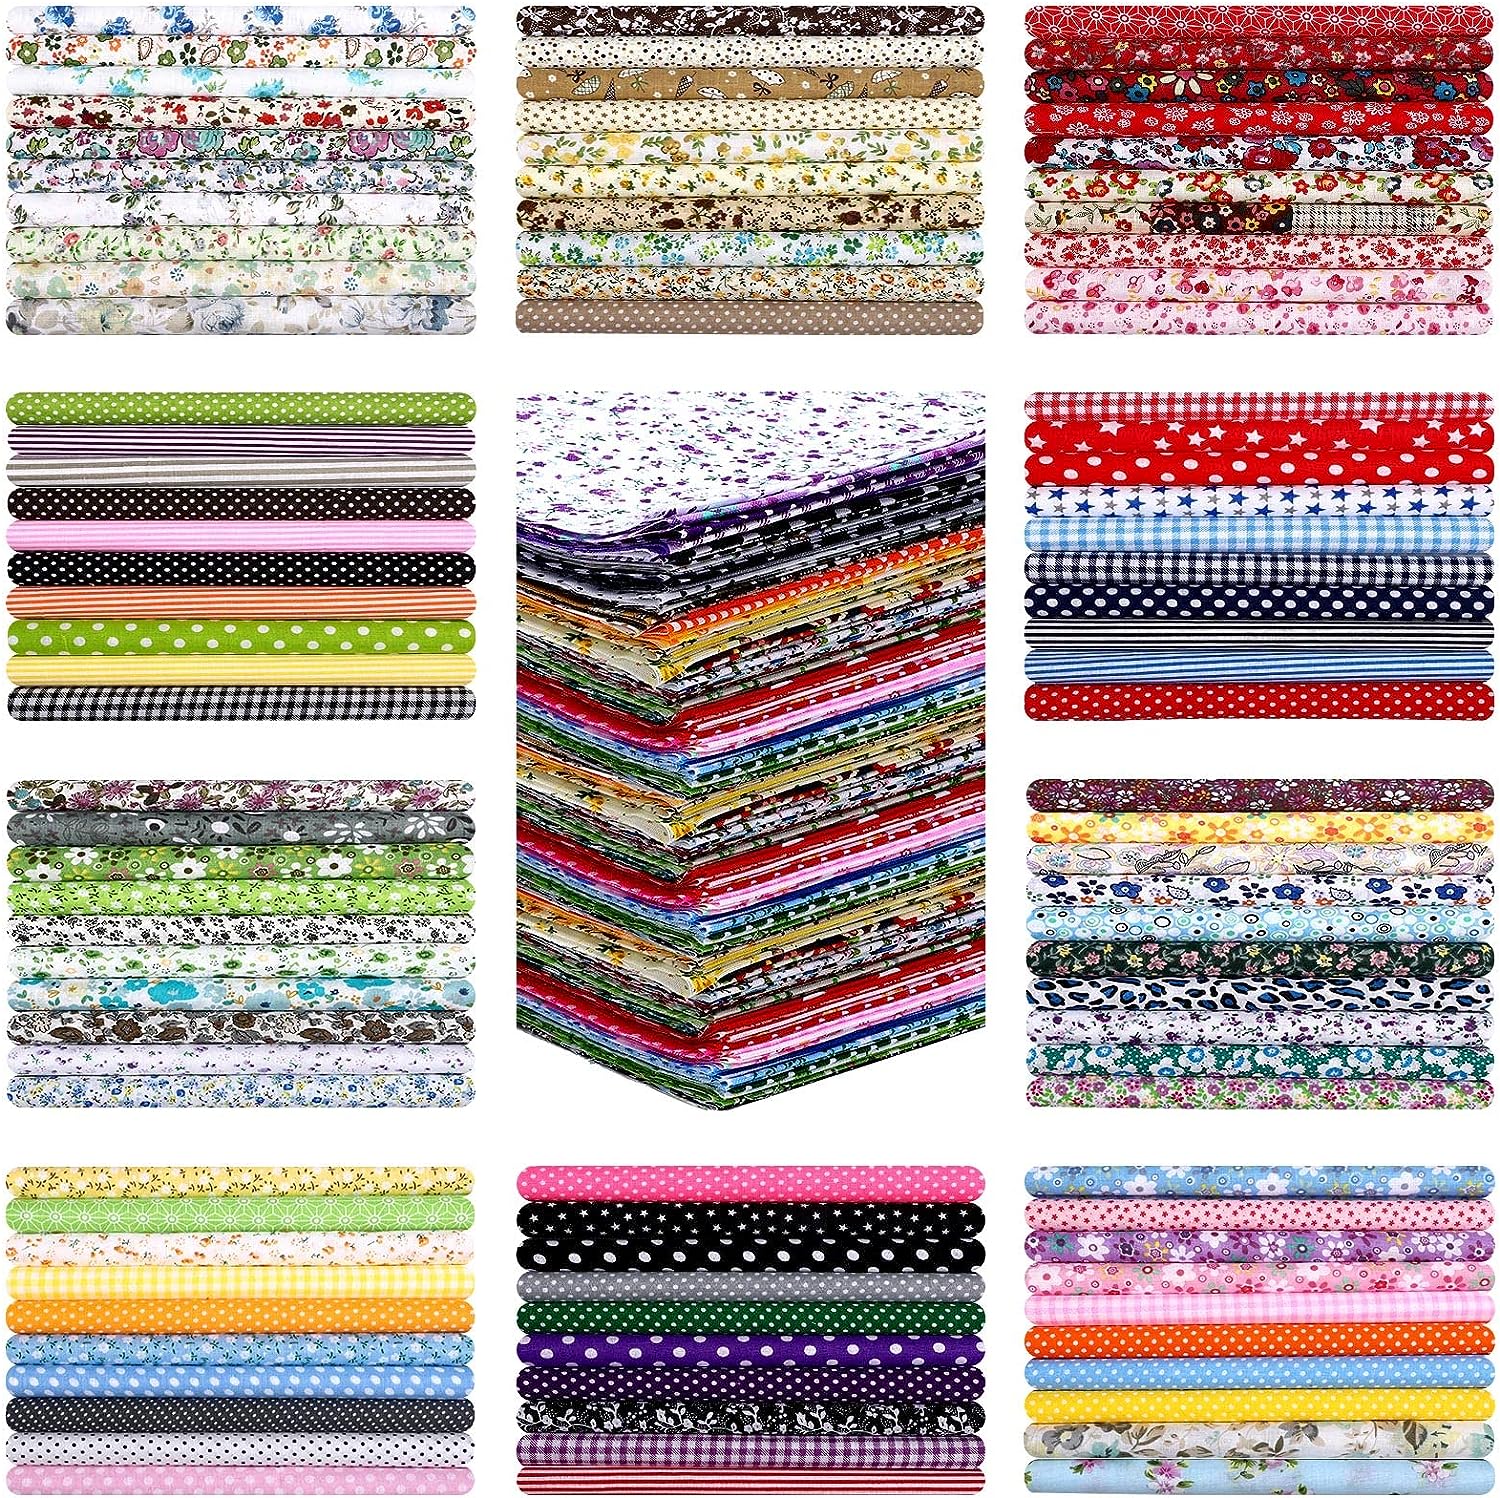 50pcs 8 x 8 inches Multicolor Cotton Fabric Bundle Squares for Quilting  Sewing, Precut Fabric Squares for Craft Patchwork 